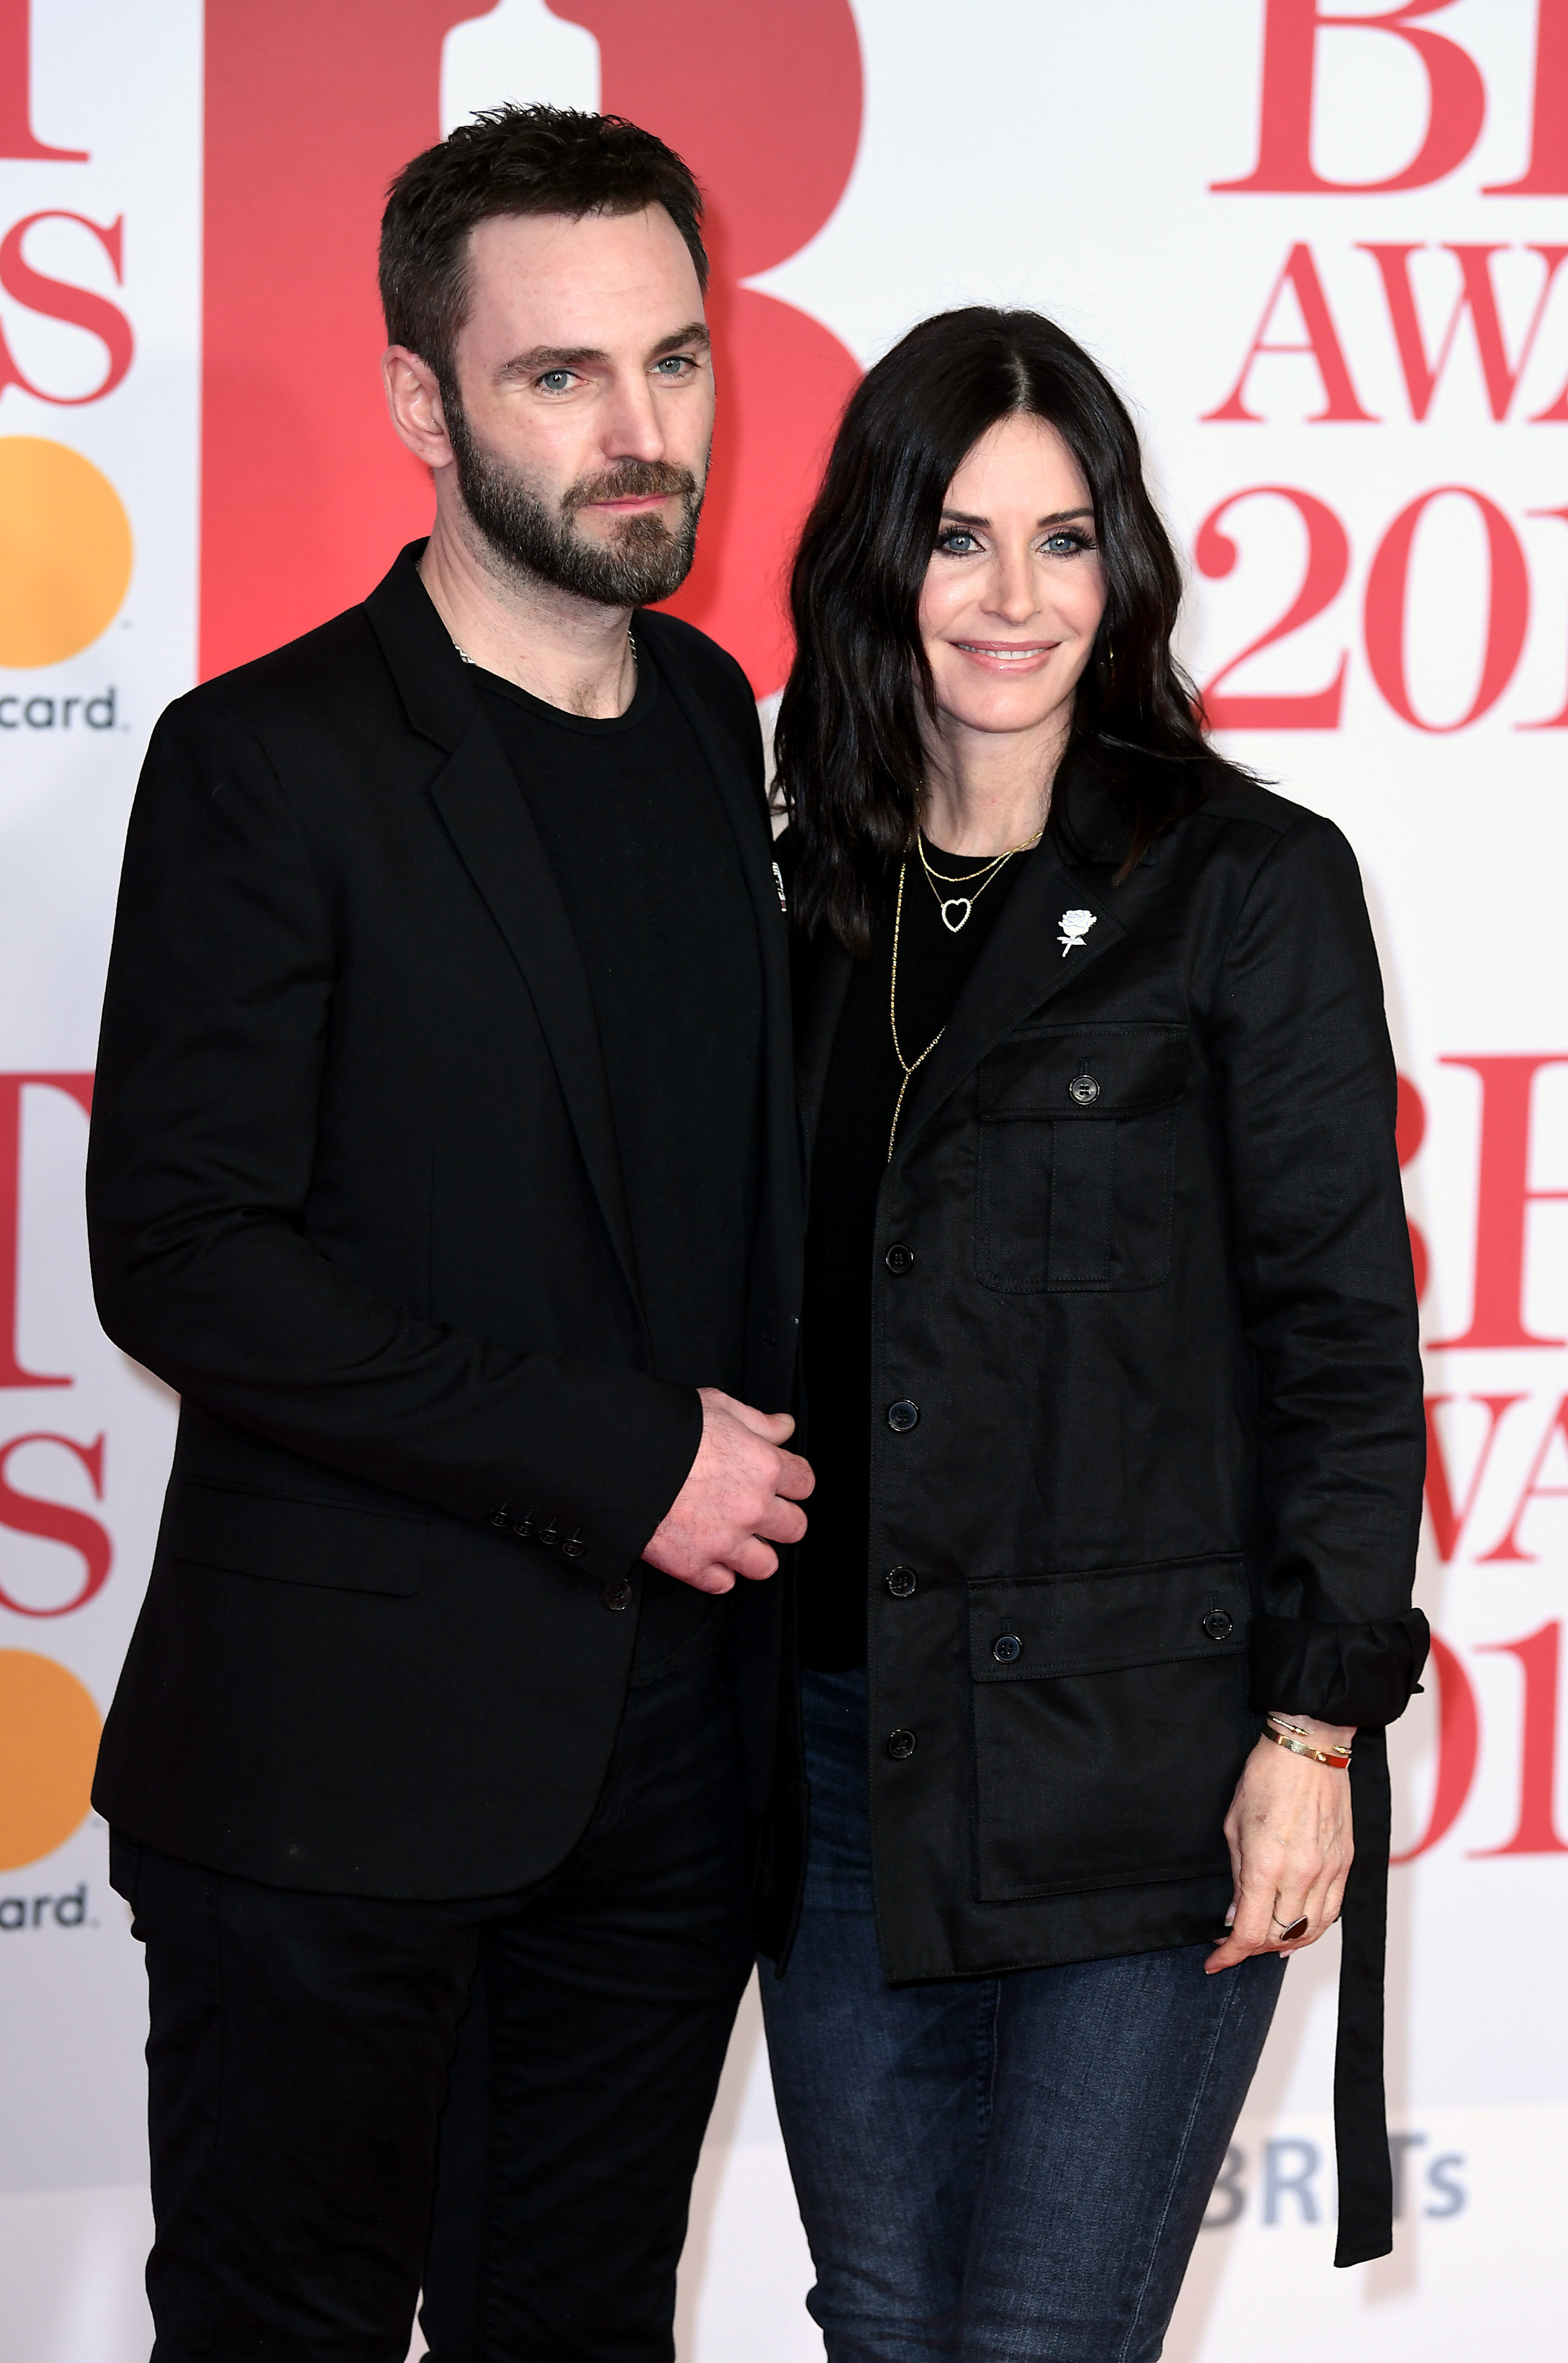 Courtney Cox & Johnny McDaid at the BRITs 2018